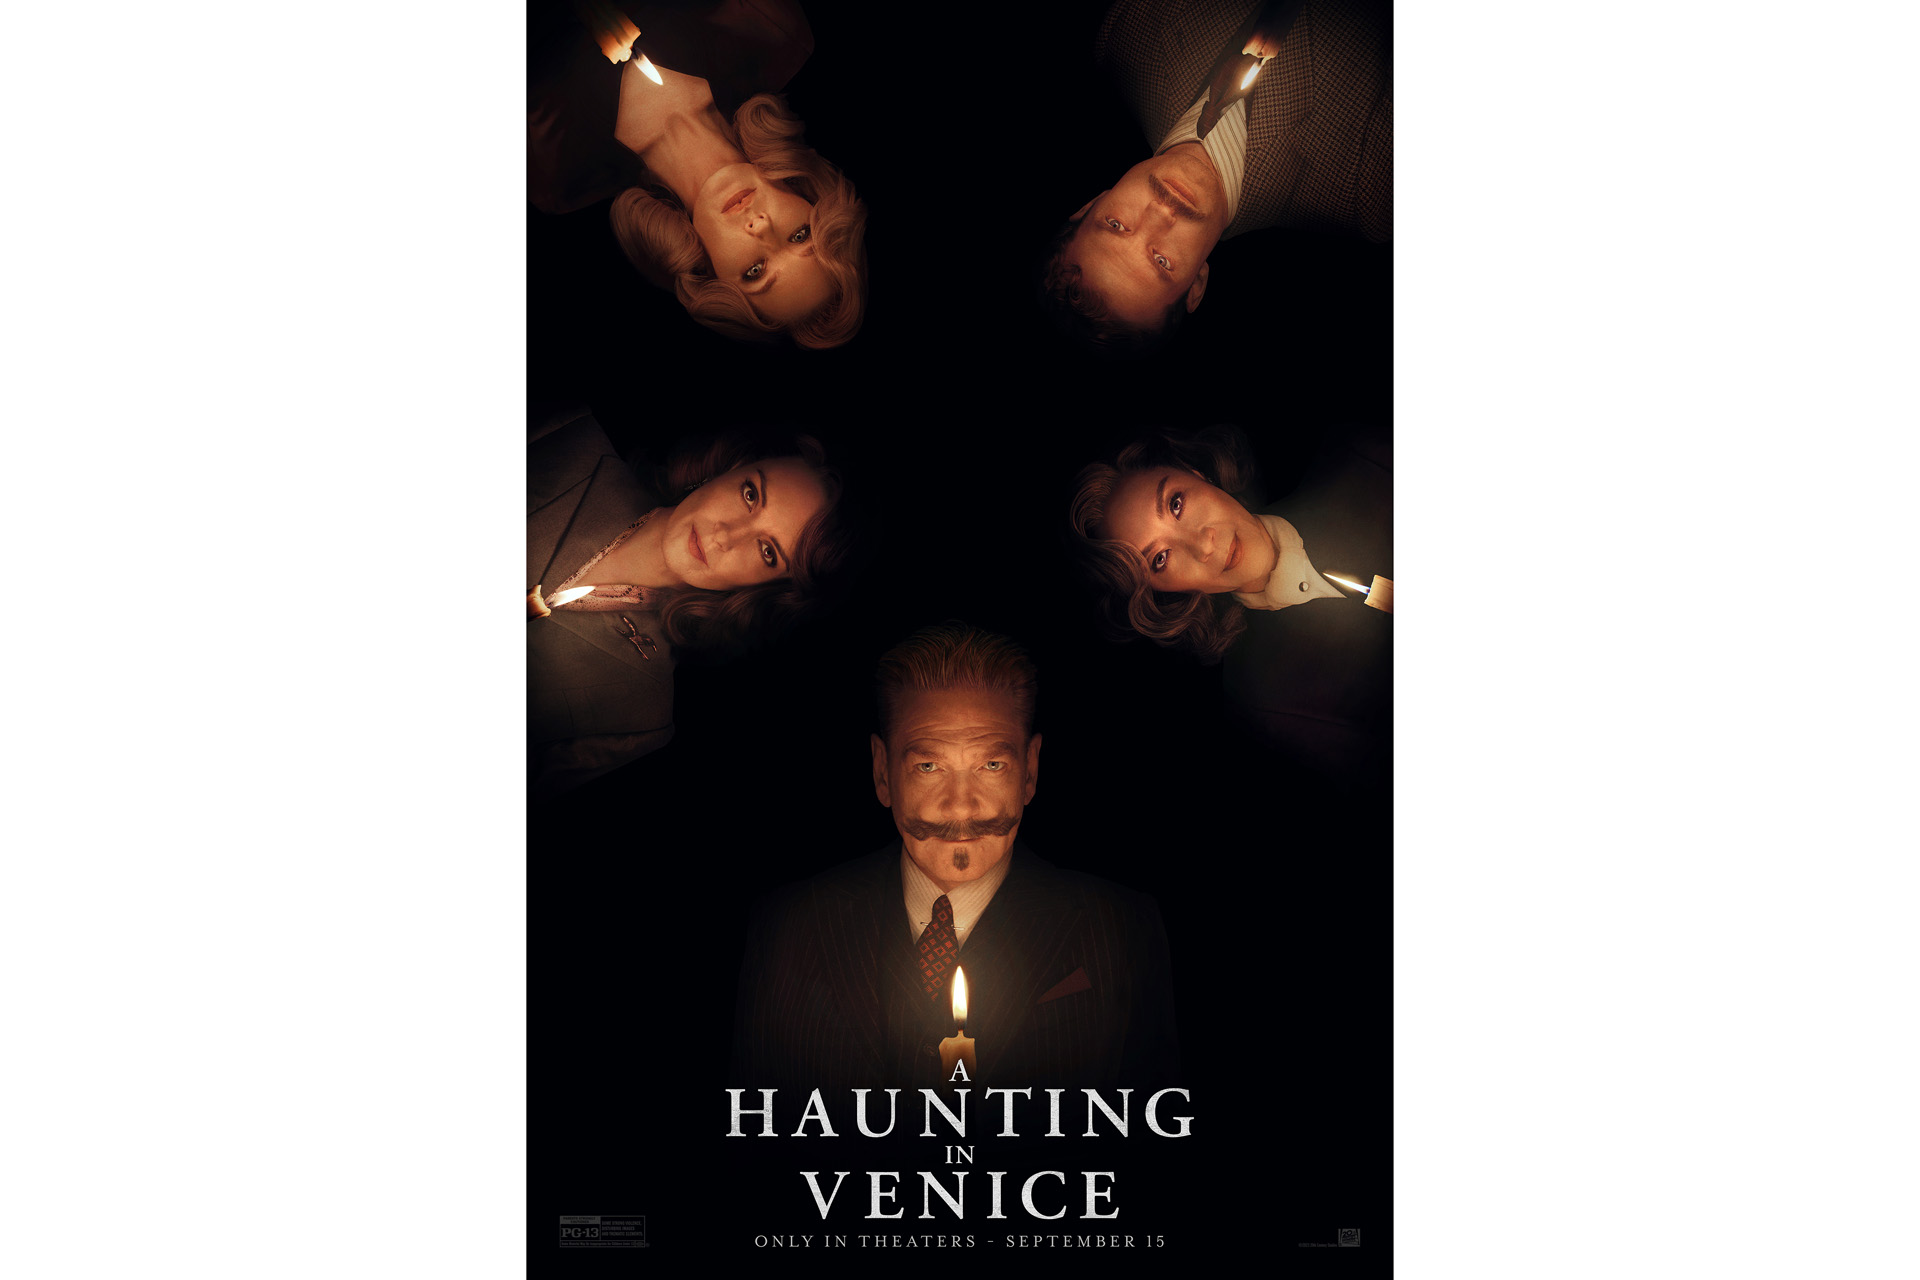 Movie poster for A HAUNTING IN VENICE